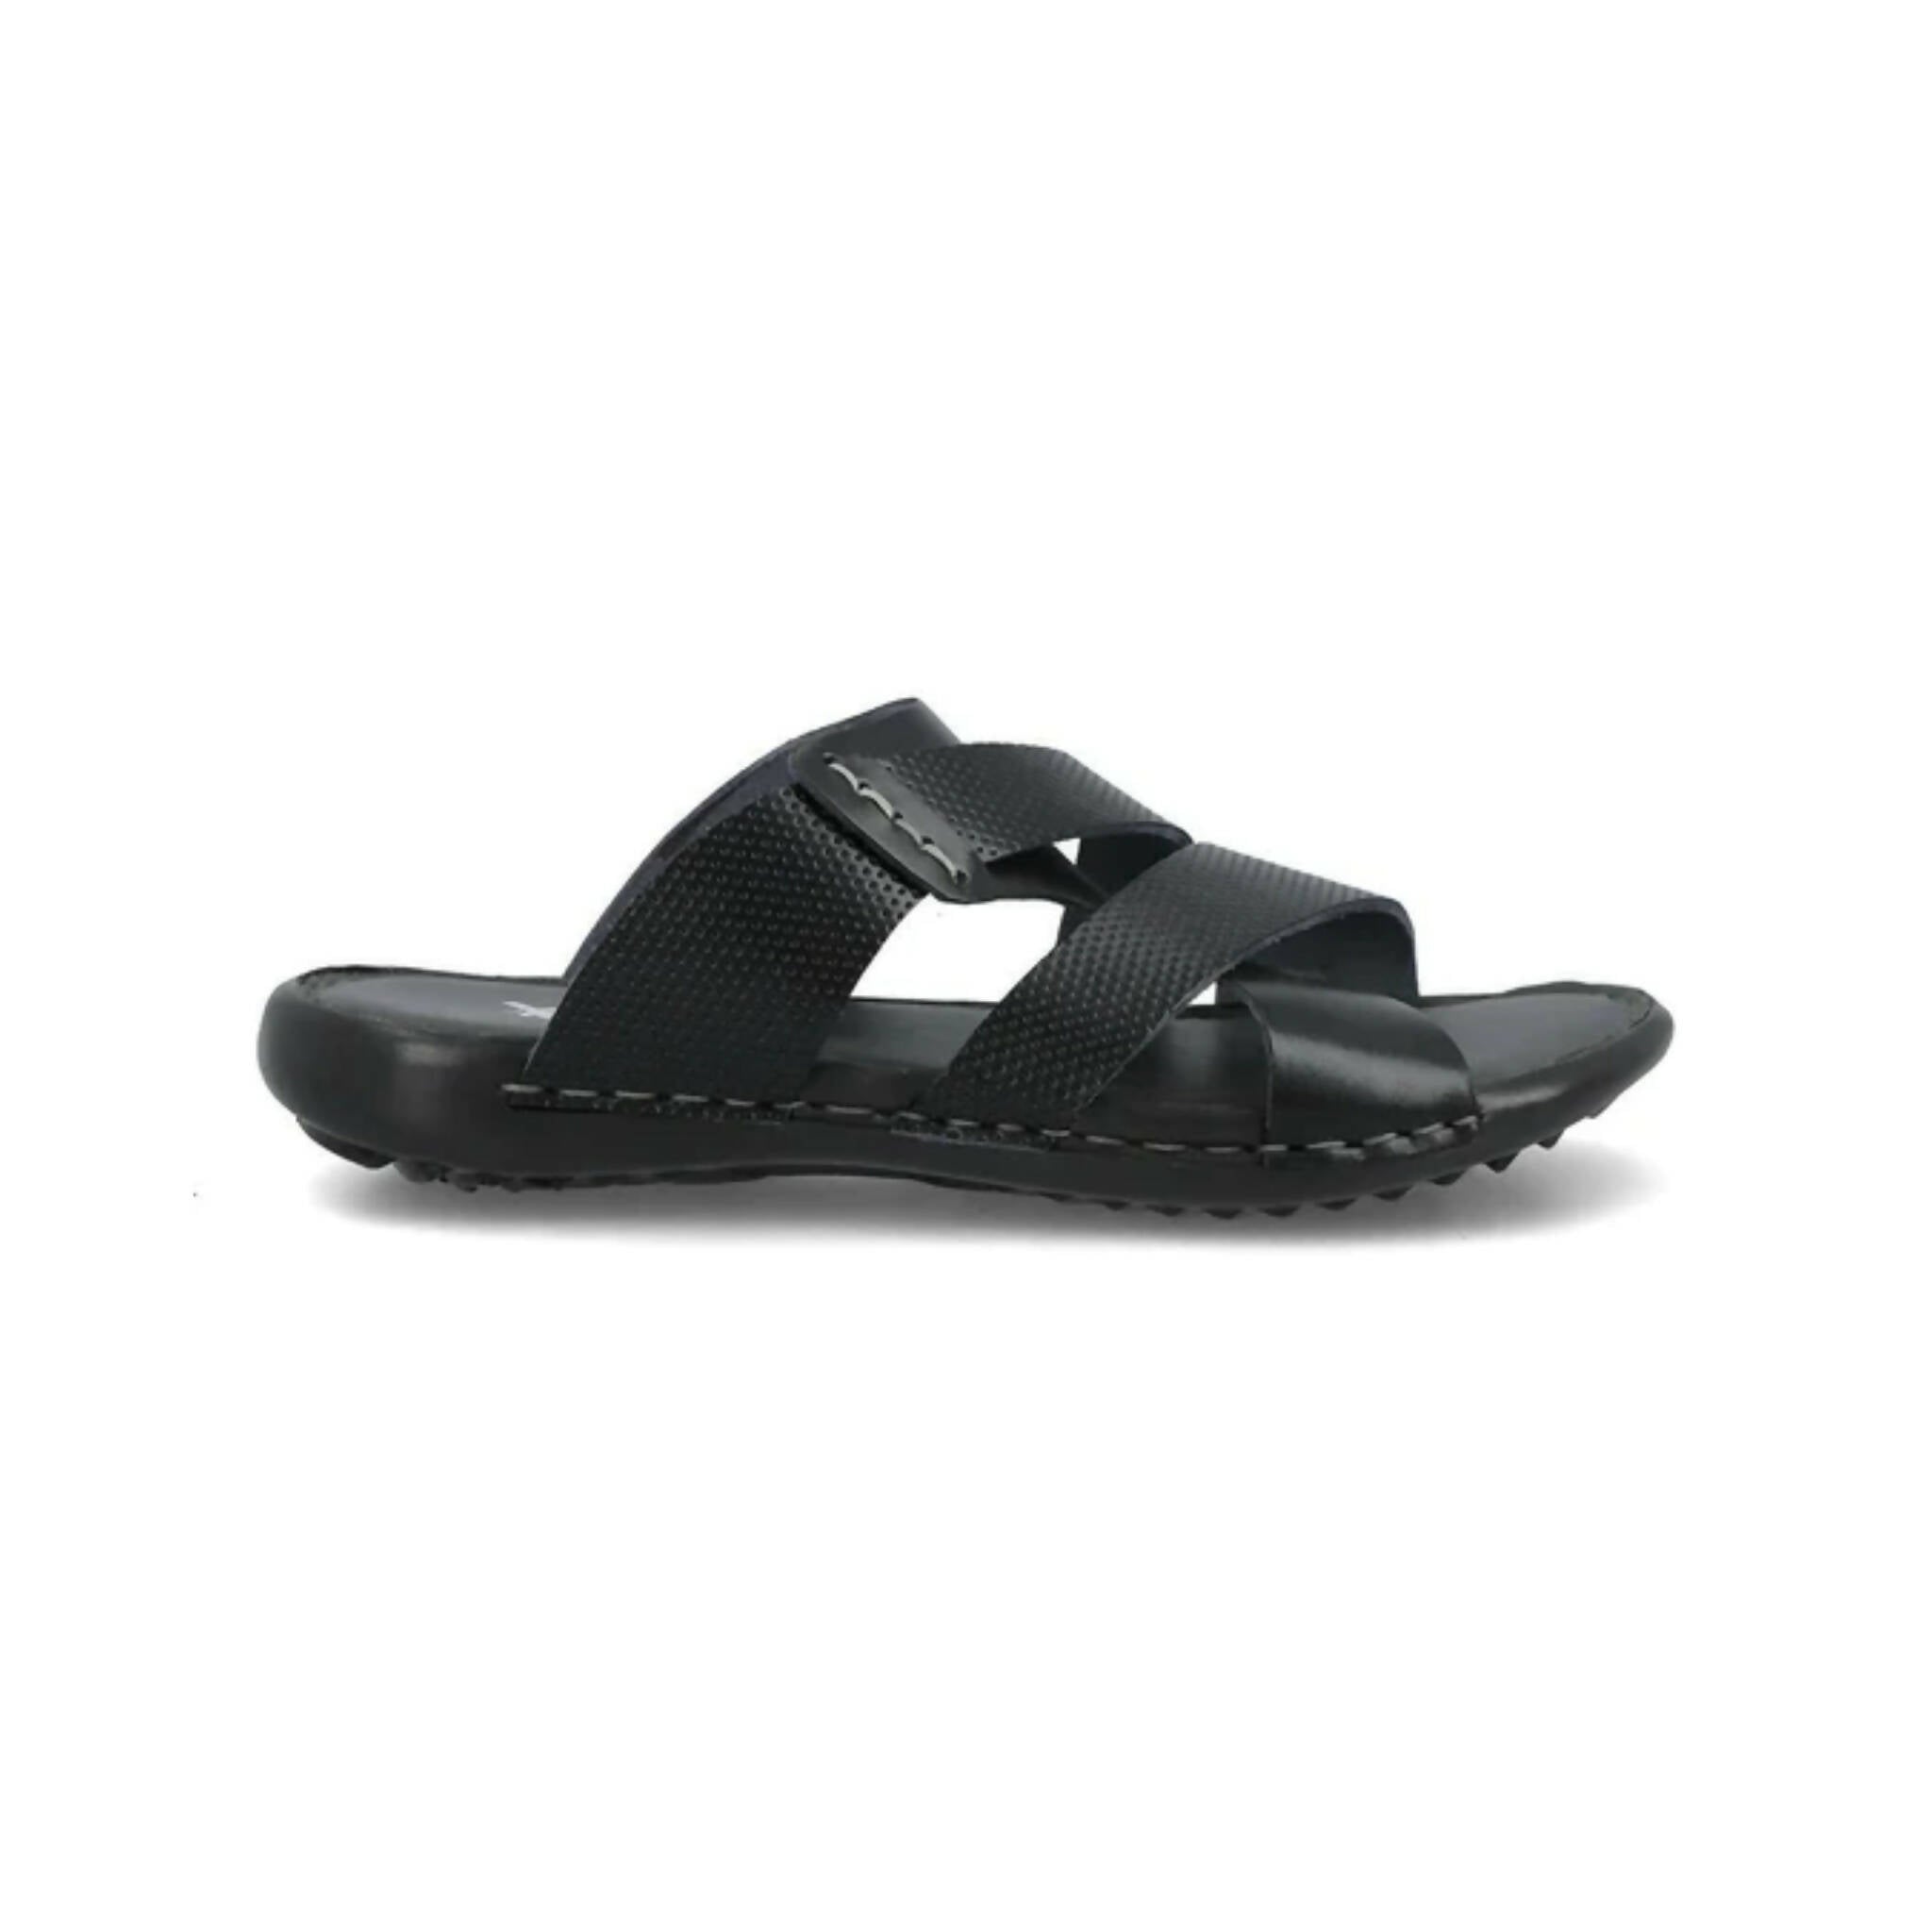 Top more than 202 action black slippers super hot